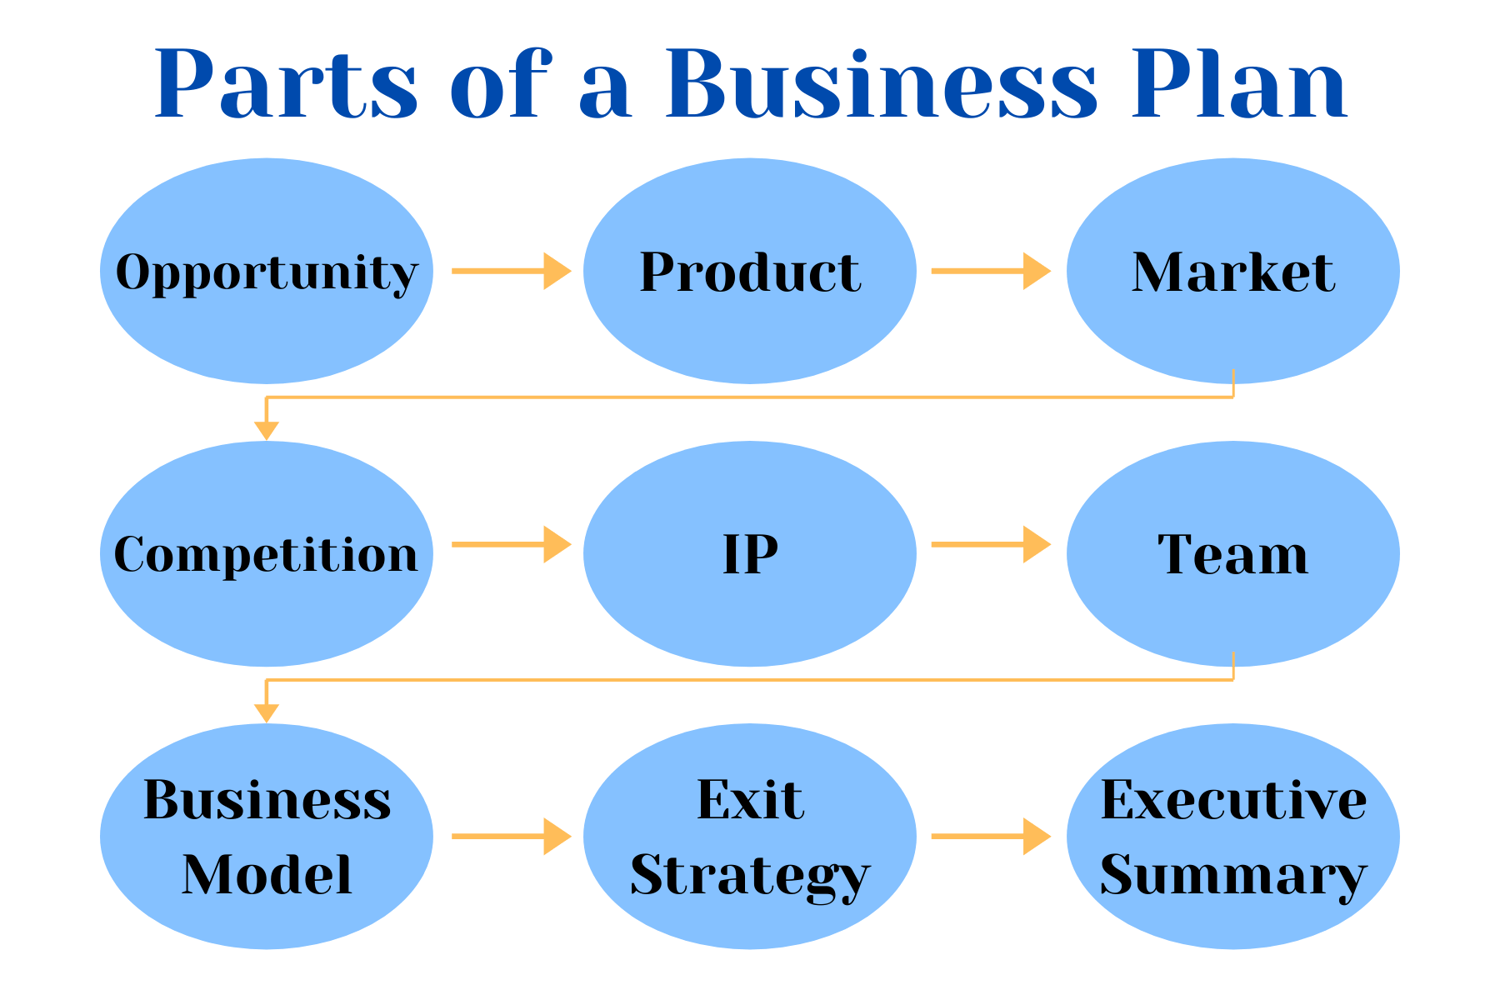 three main components of a business plan